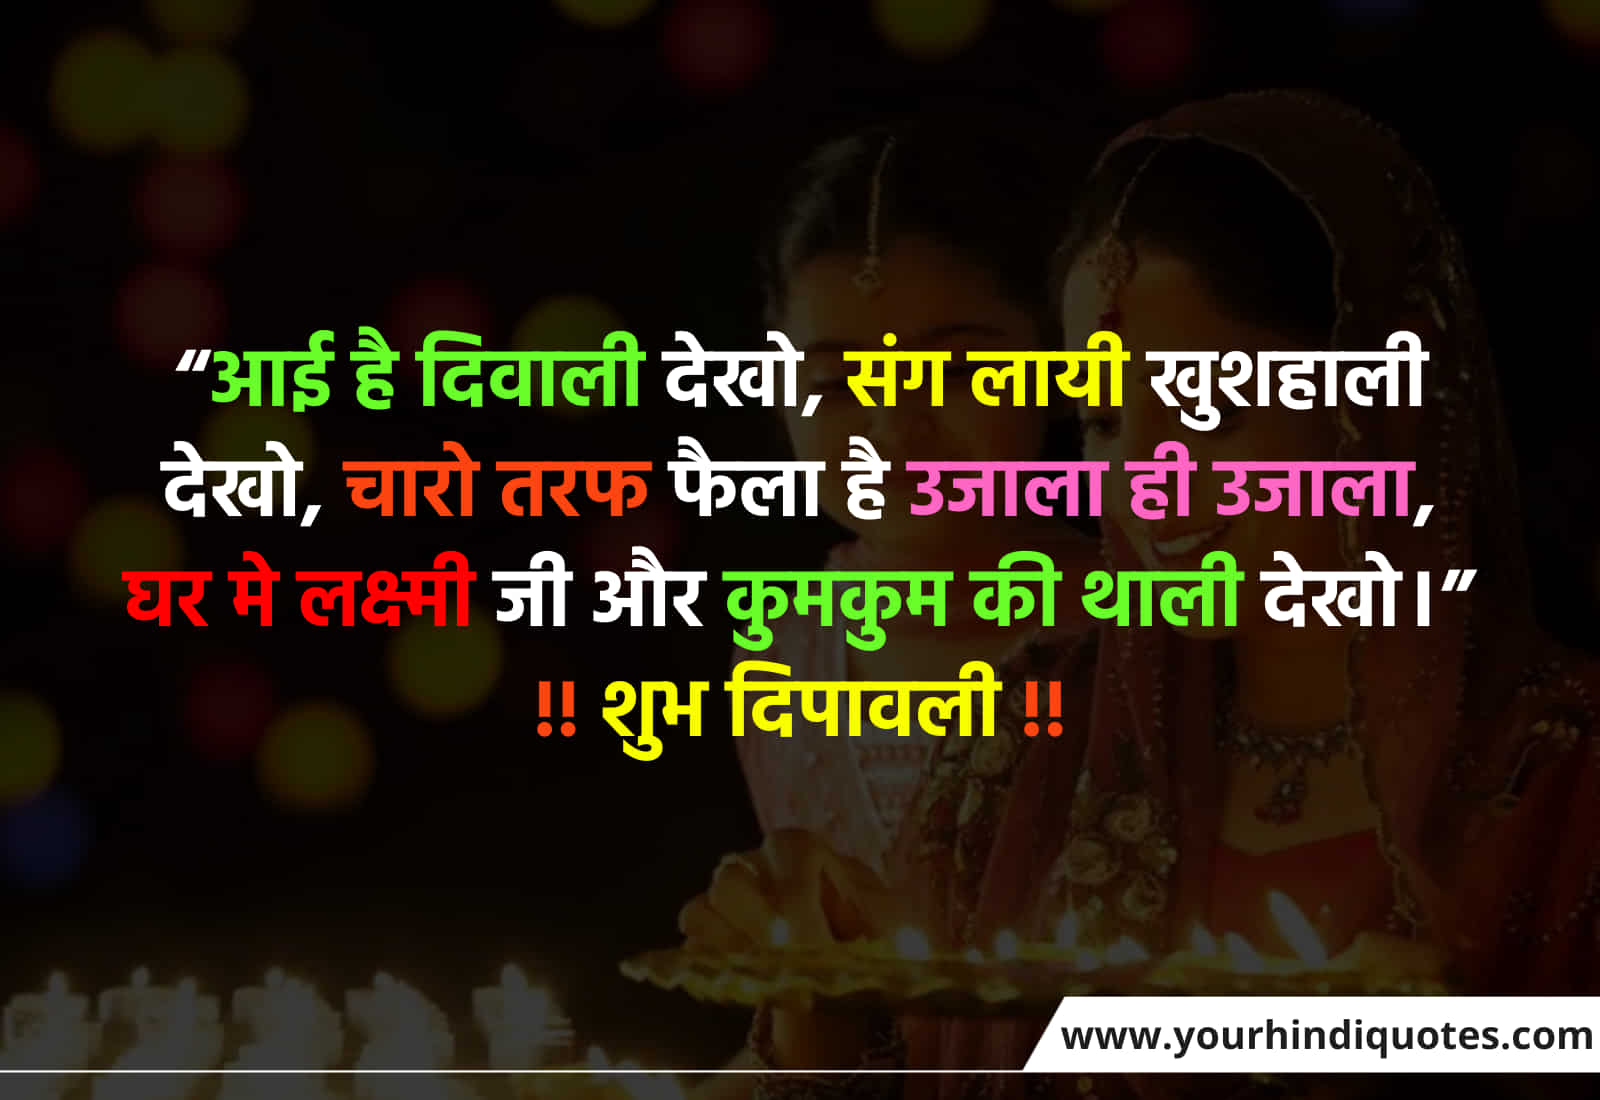 Happy Diwali Messages For Family